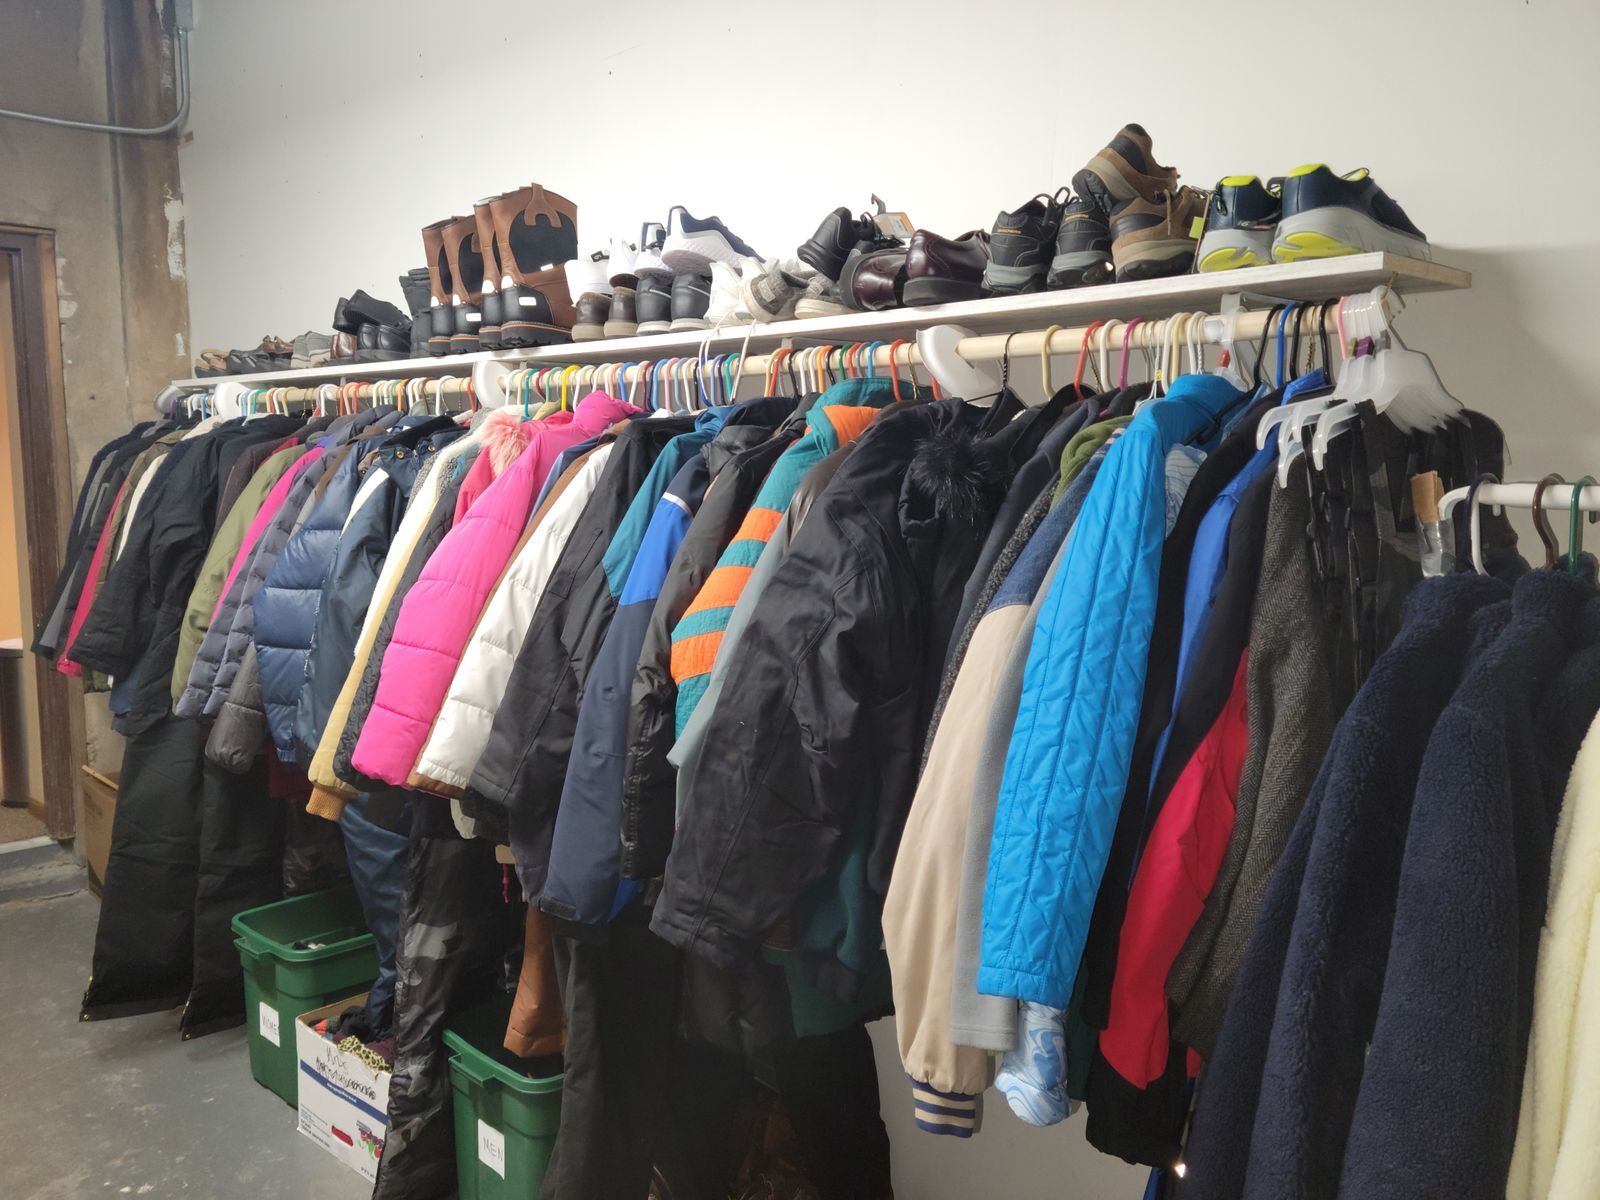 Donate today to the Community Action Winter Clothing Drive